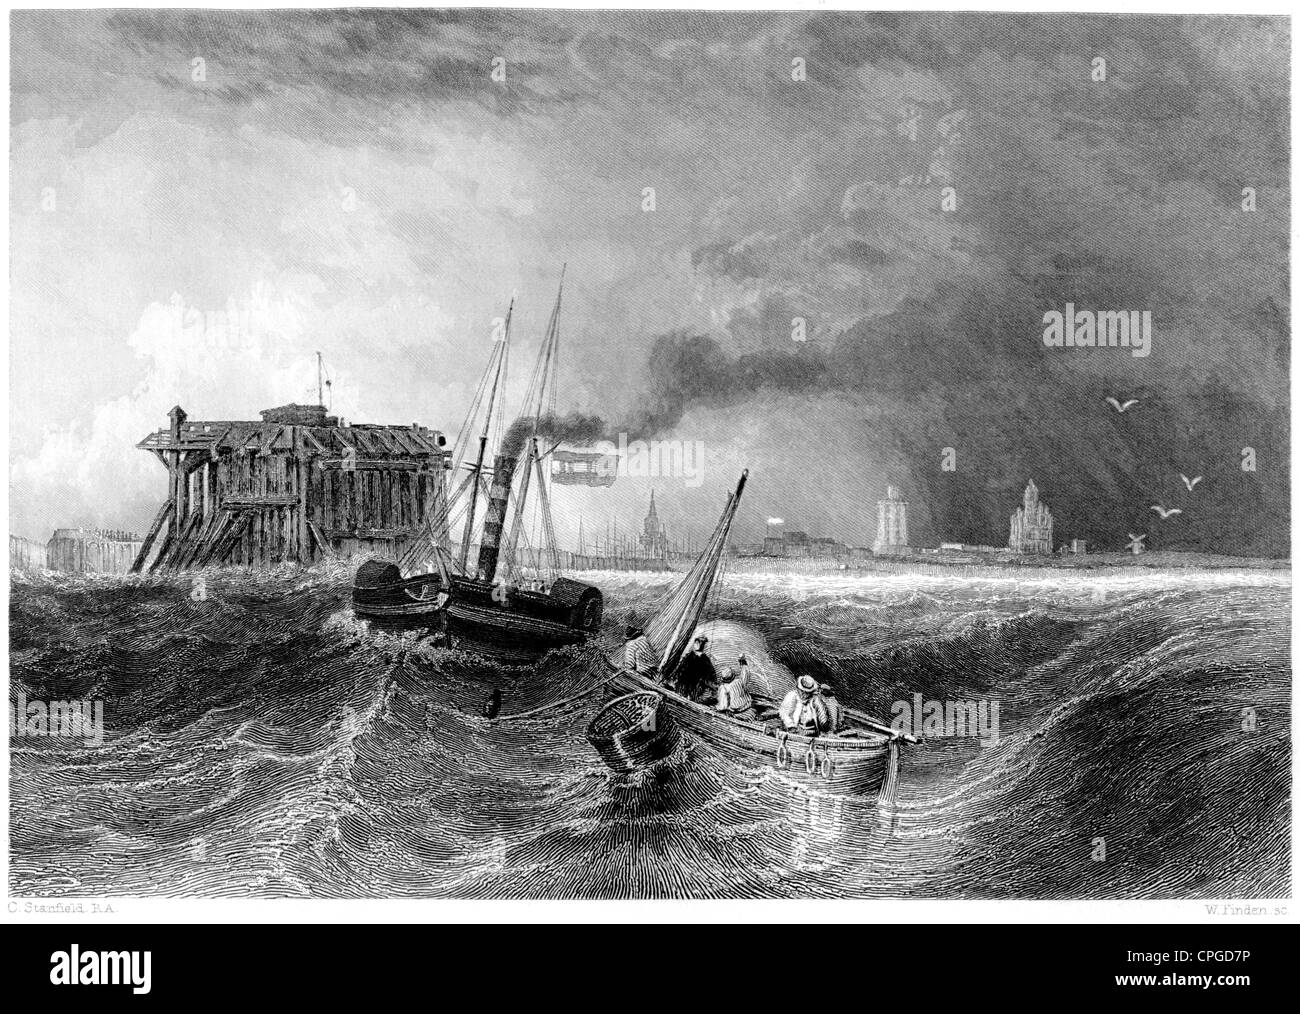 Historical calais france Black and White Stock Photos & Images - Alamy